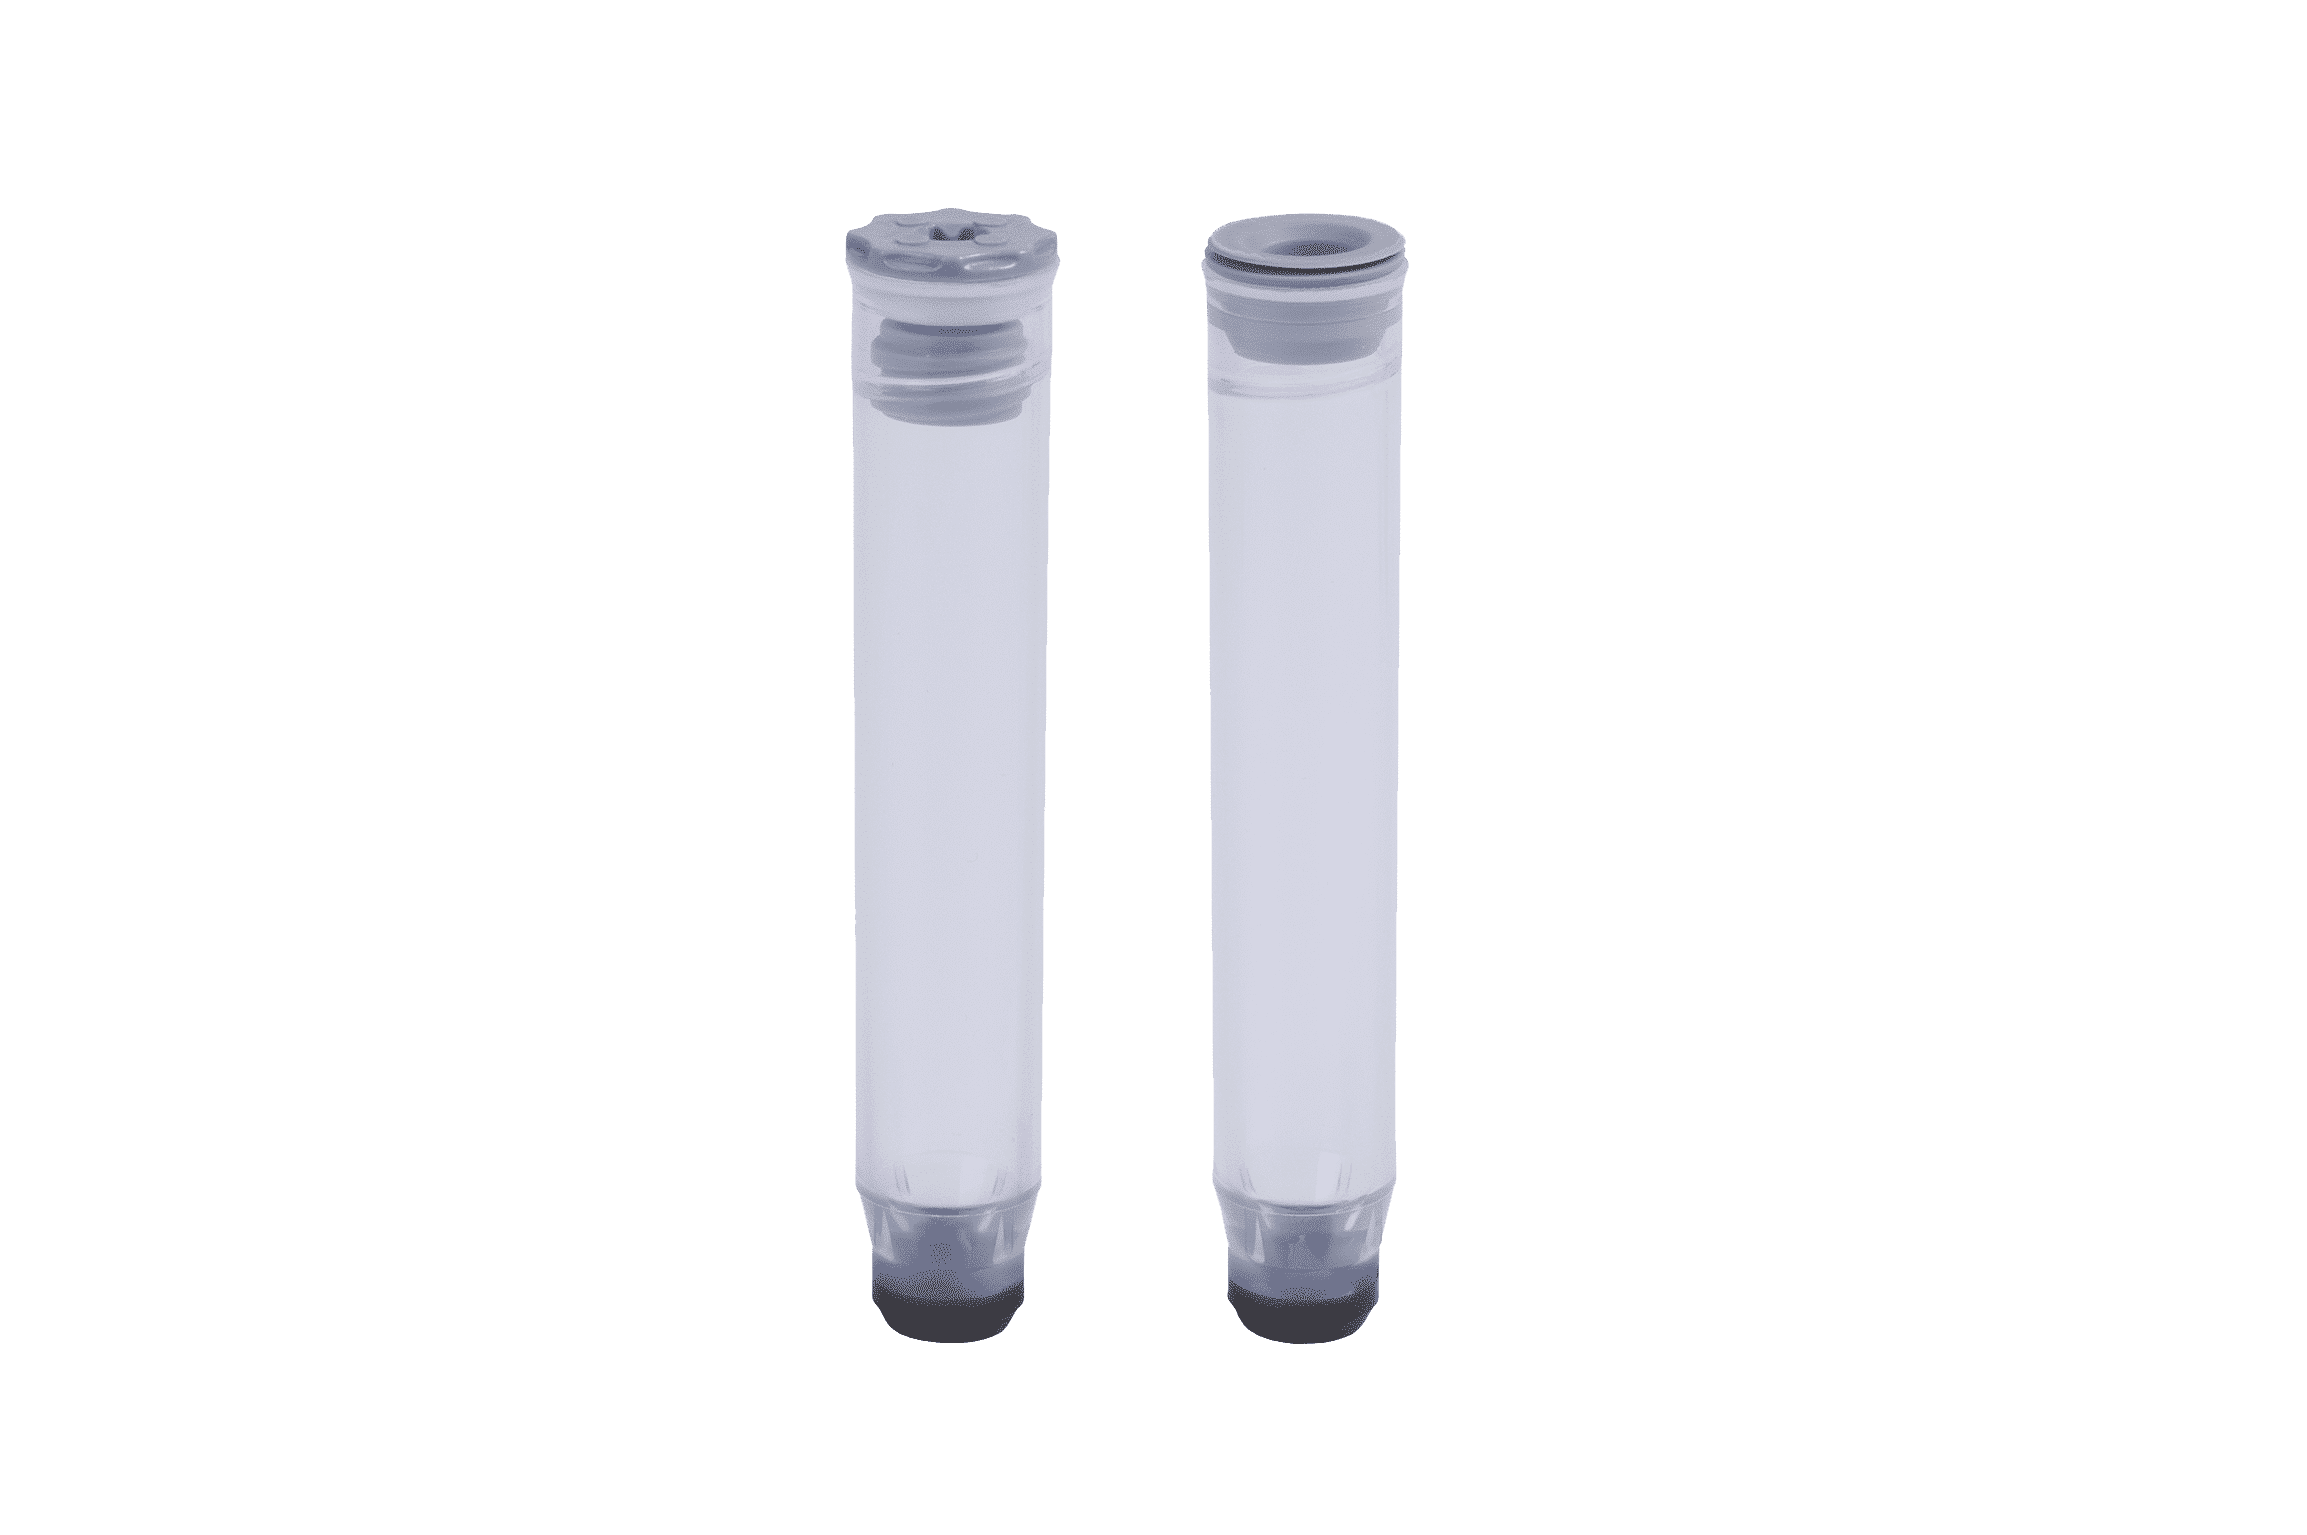 A 1.40ml internal thread tube precapped with a grey low profile screw cap and a 1.40ml internally threaded tube precapped with a grey TPE push cap